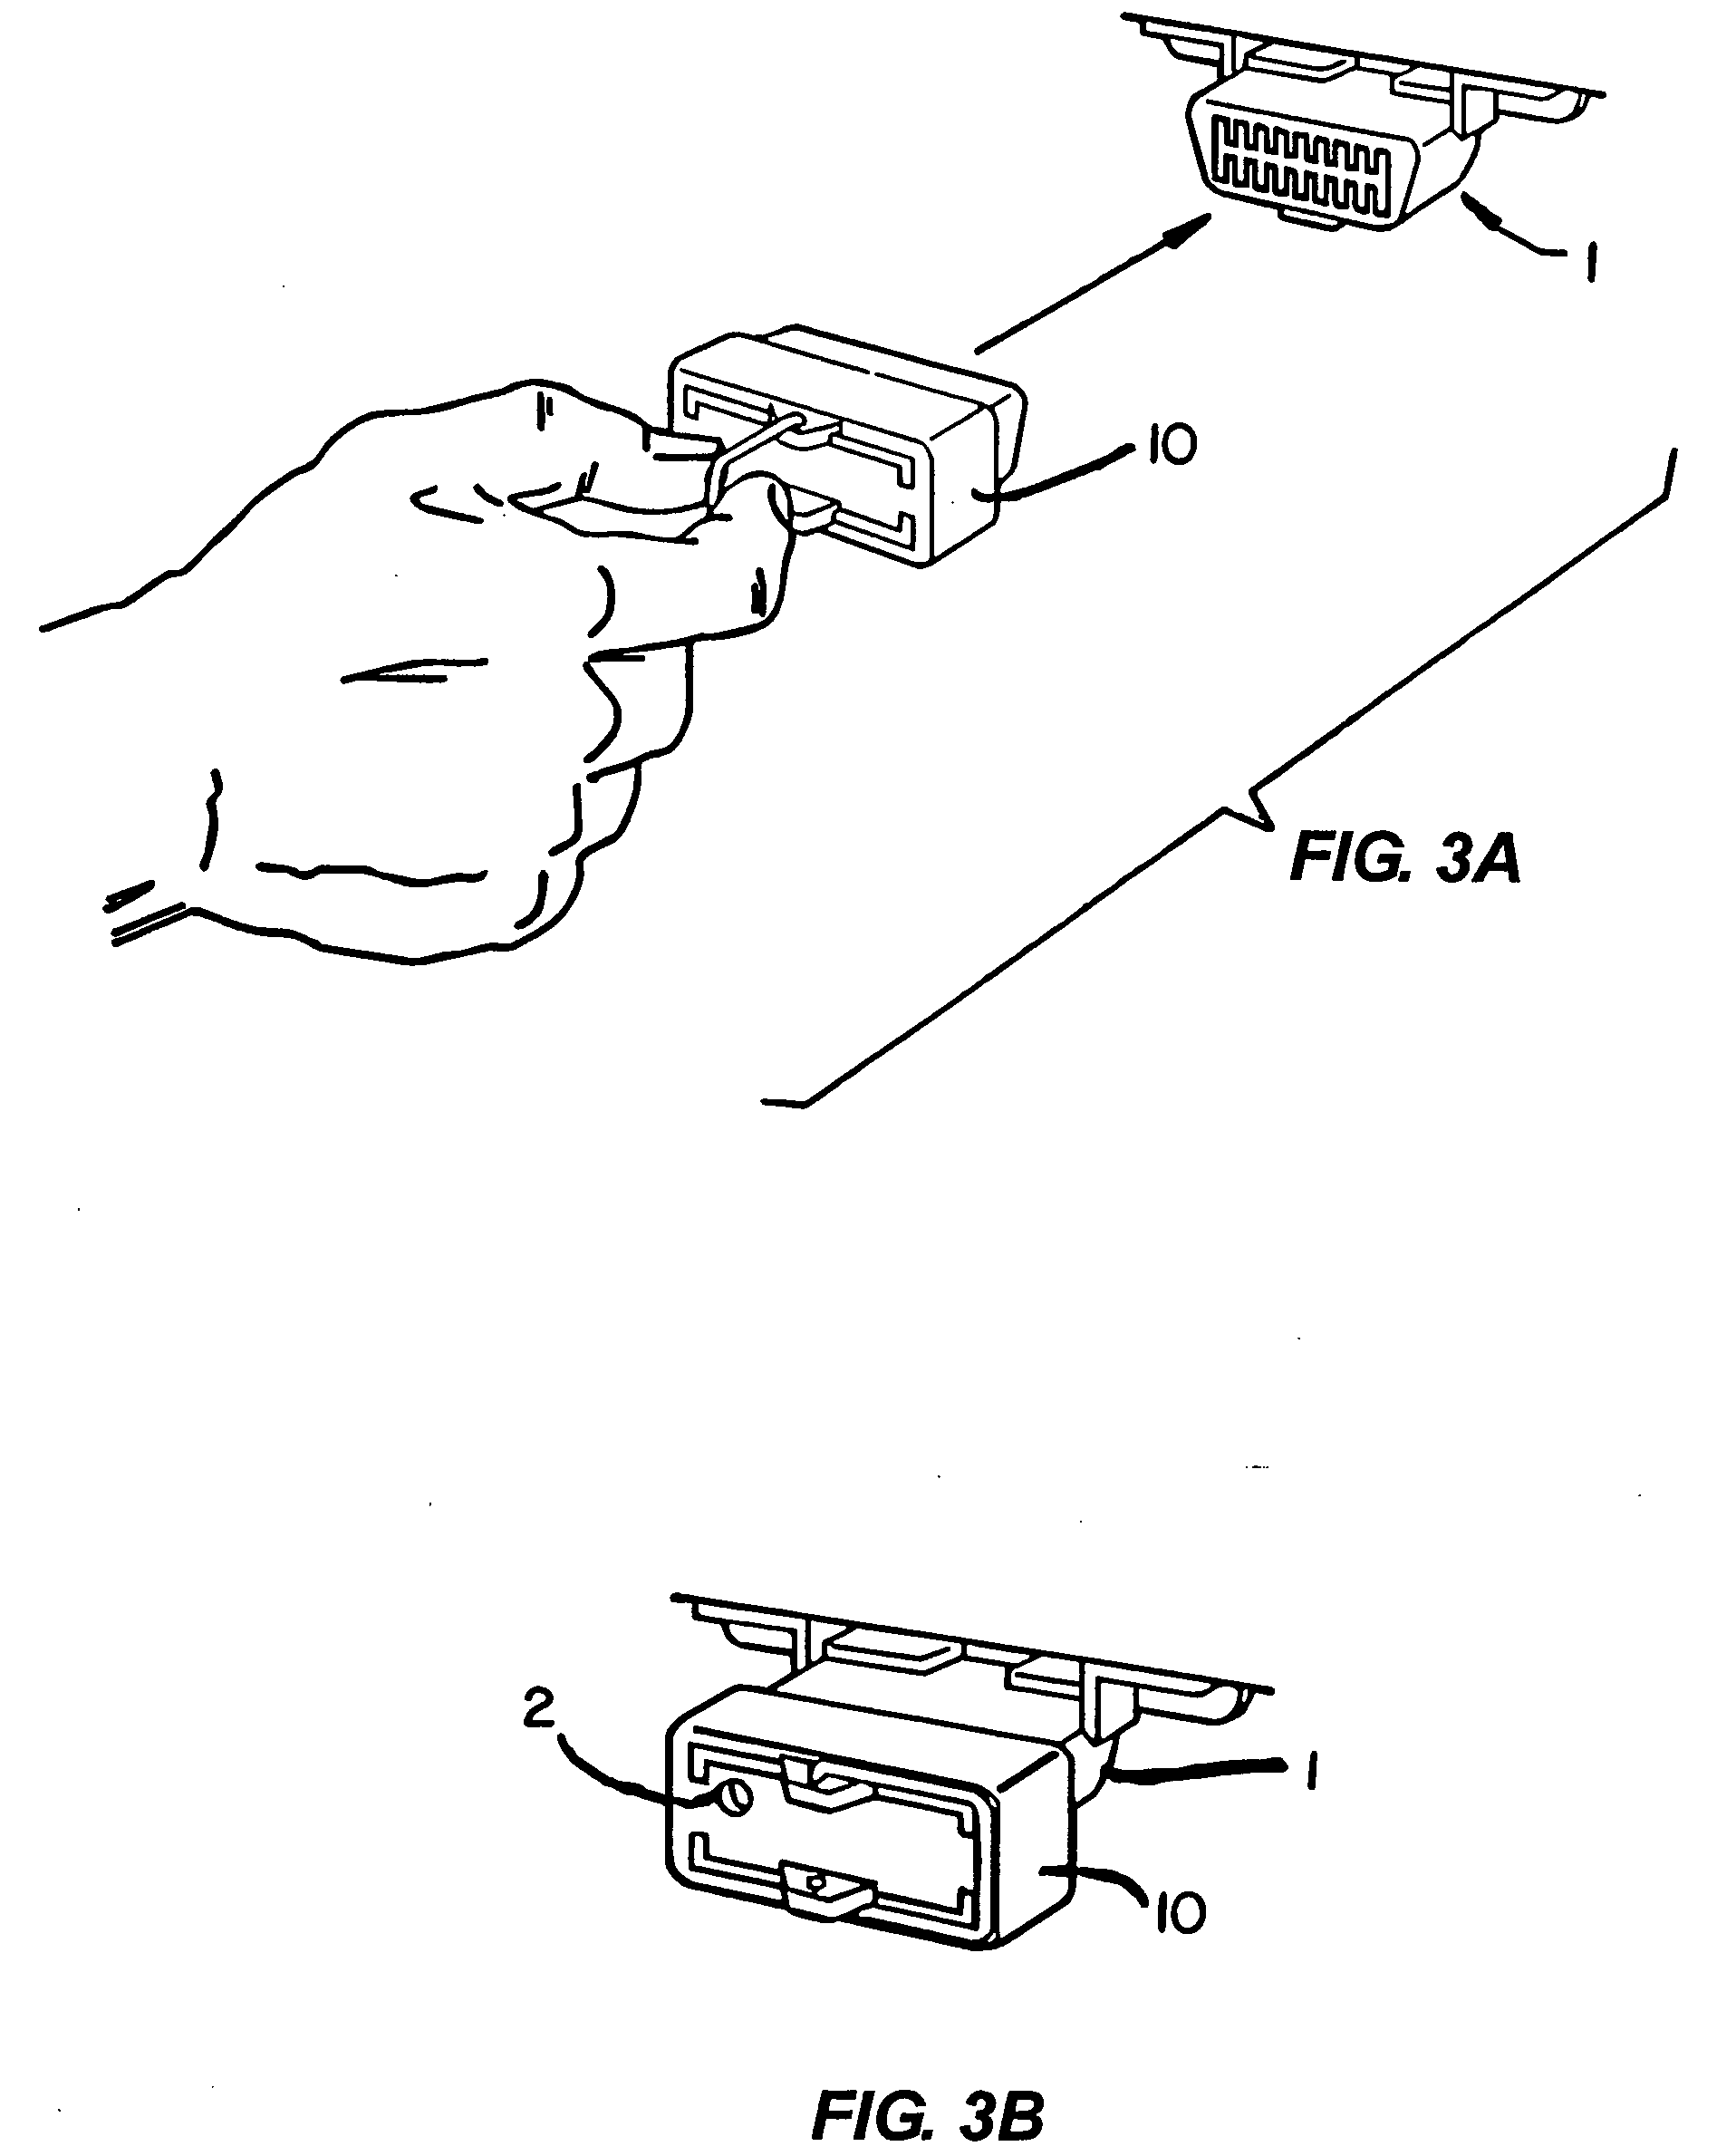 Module for monitoring vehicle operation through onboard diagnostic port